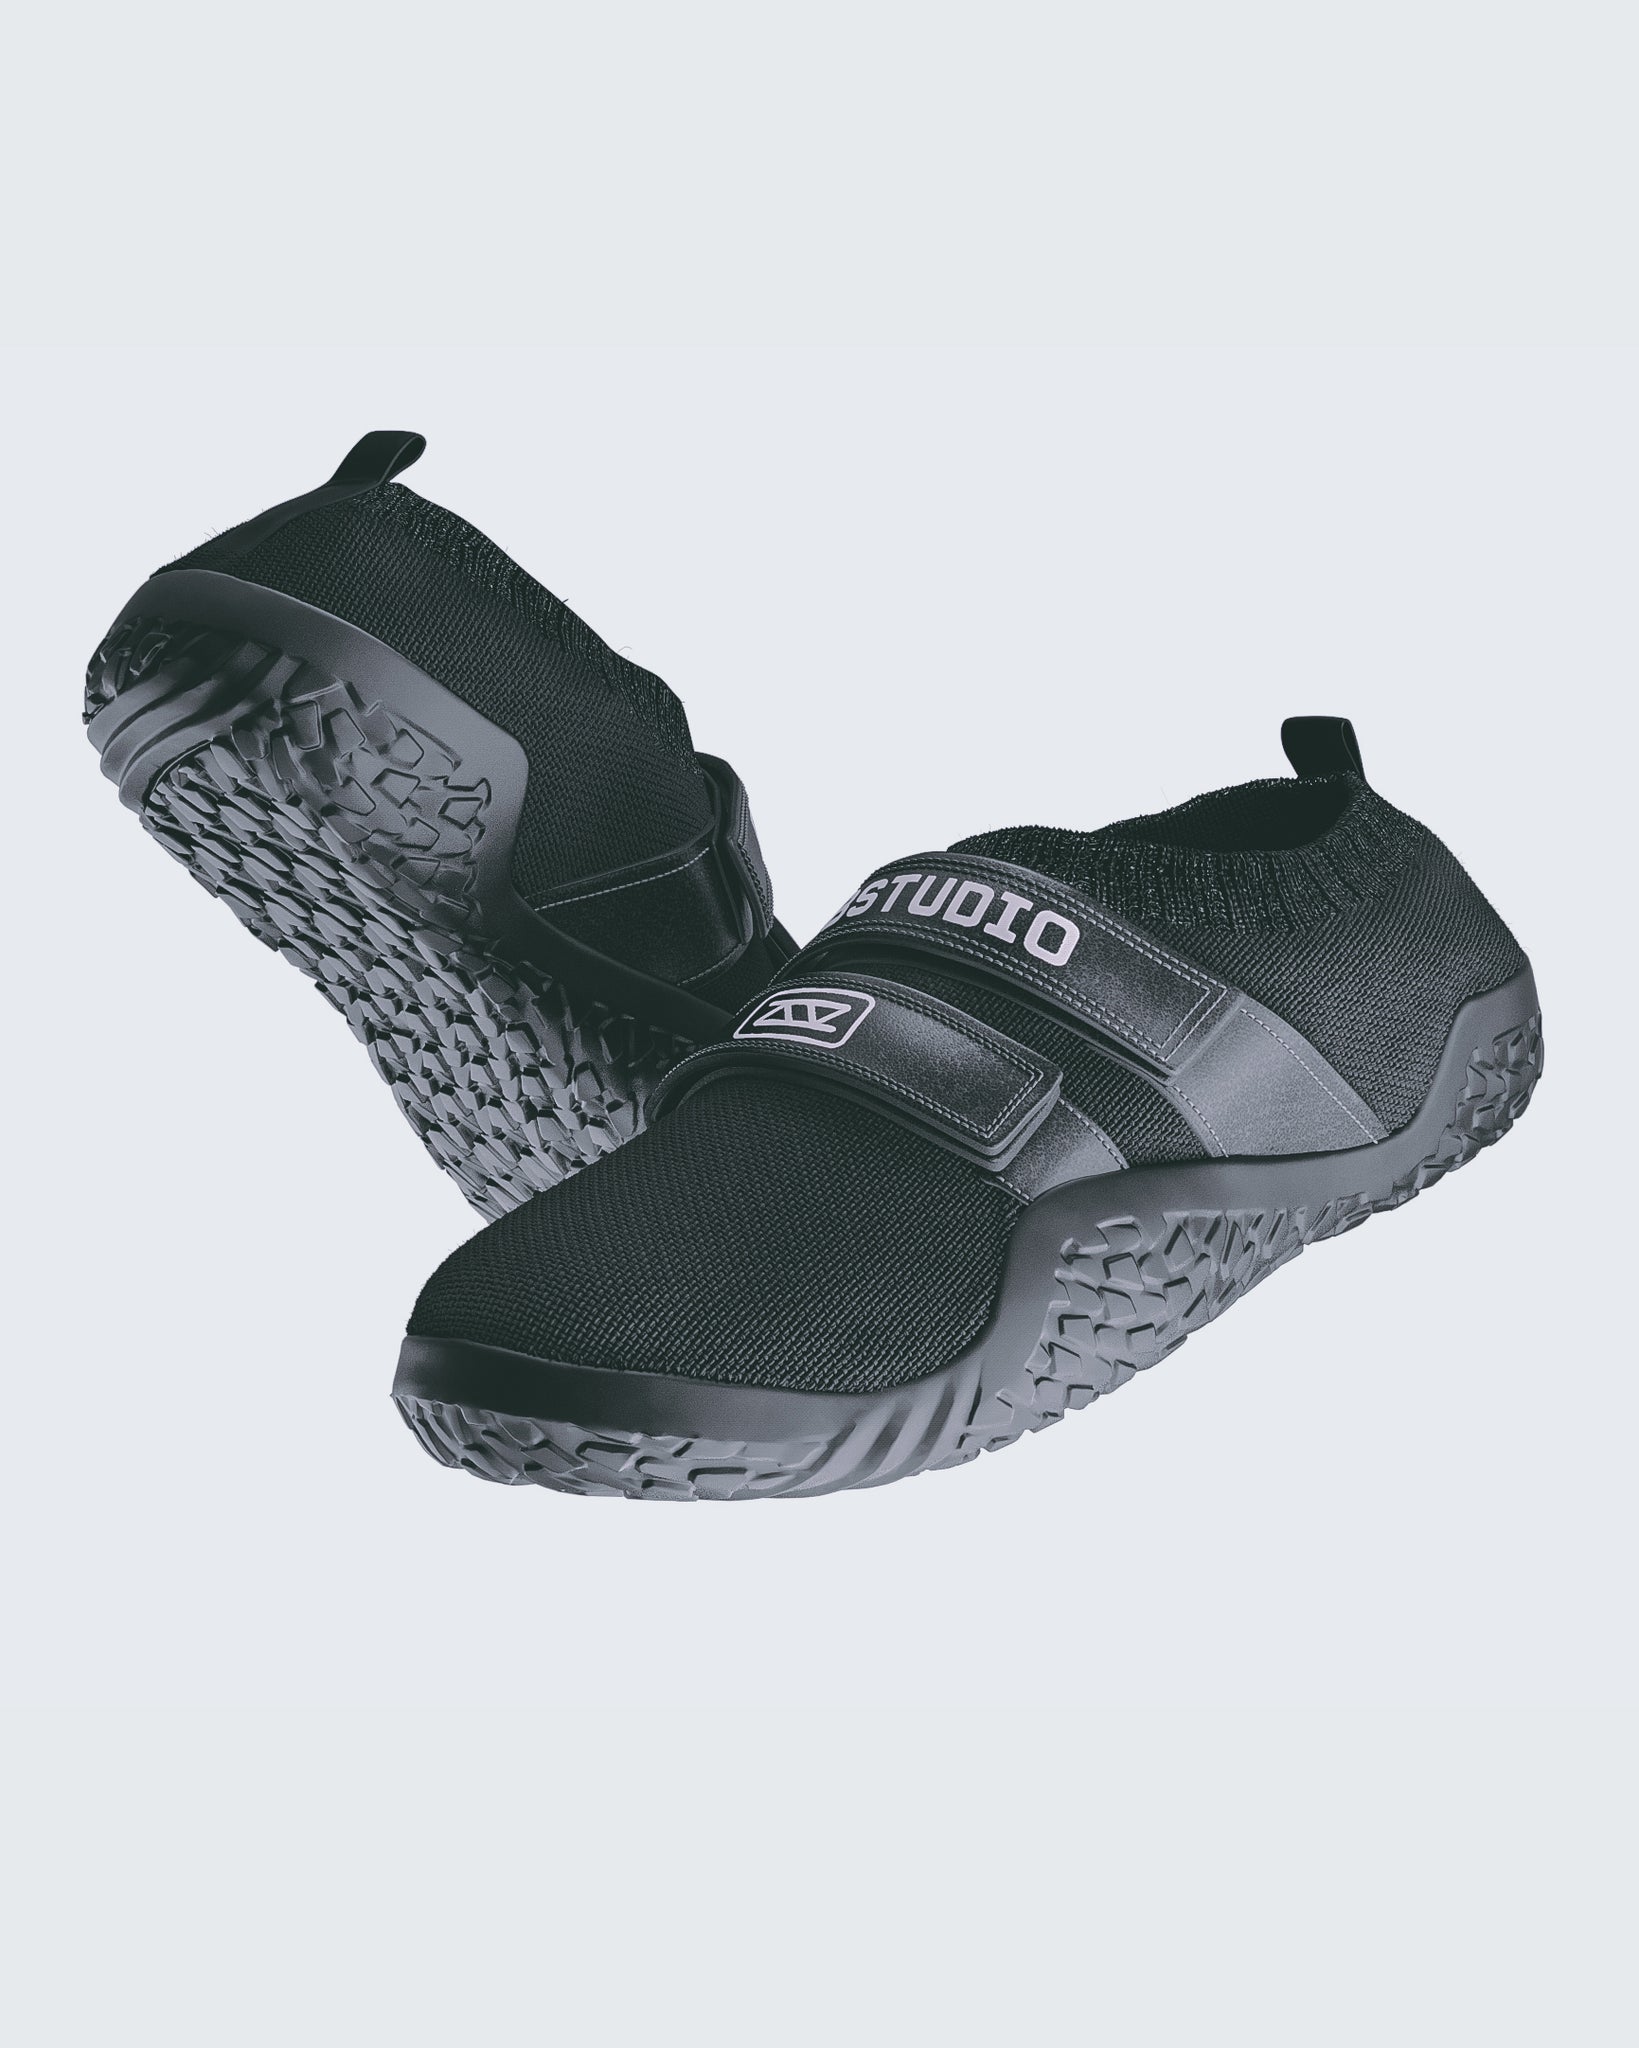 Slippers Pro - Negros